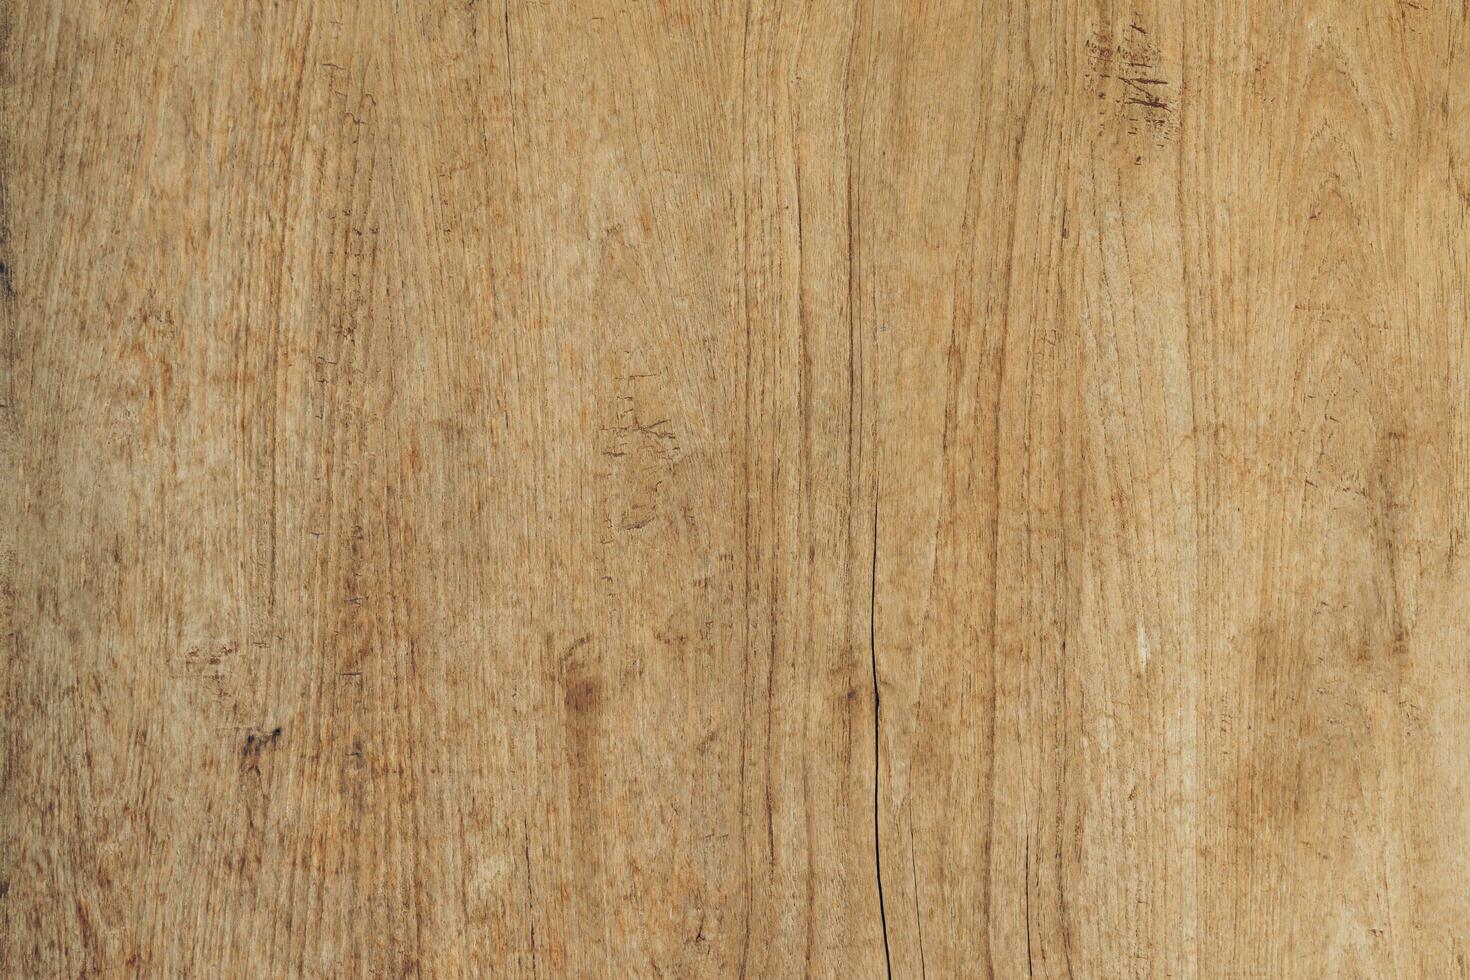 Wooden texture and background with copy space photo